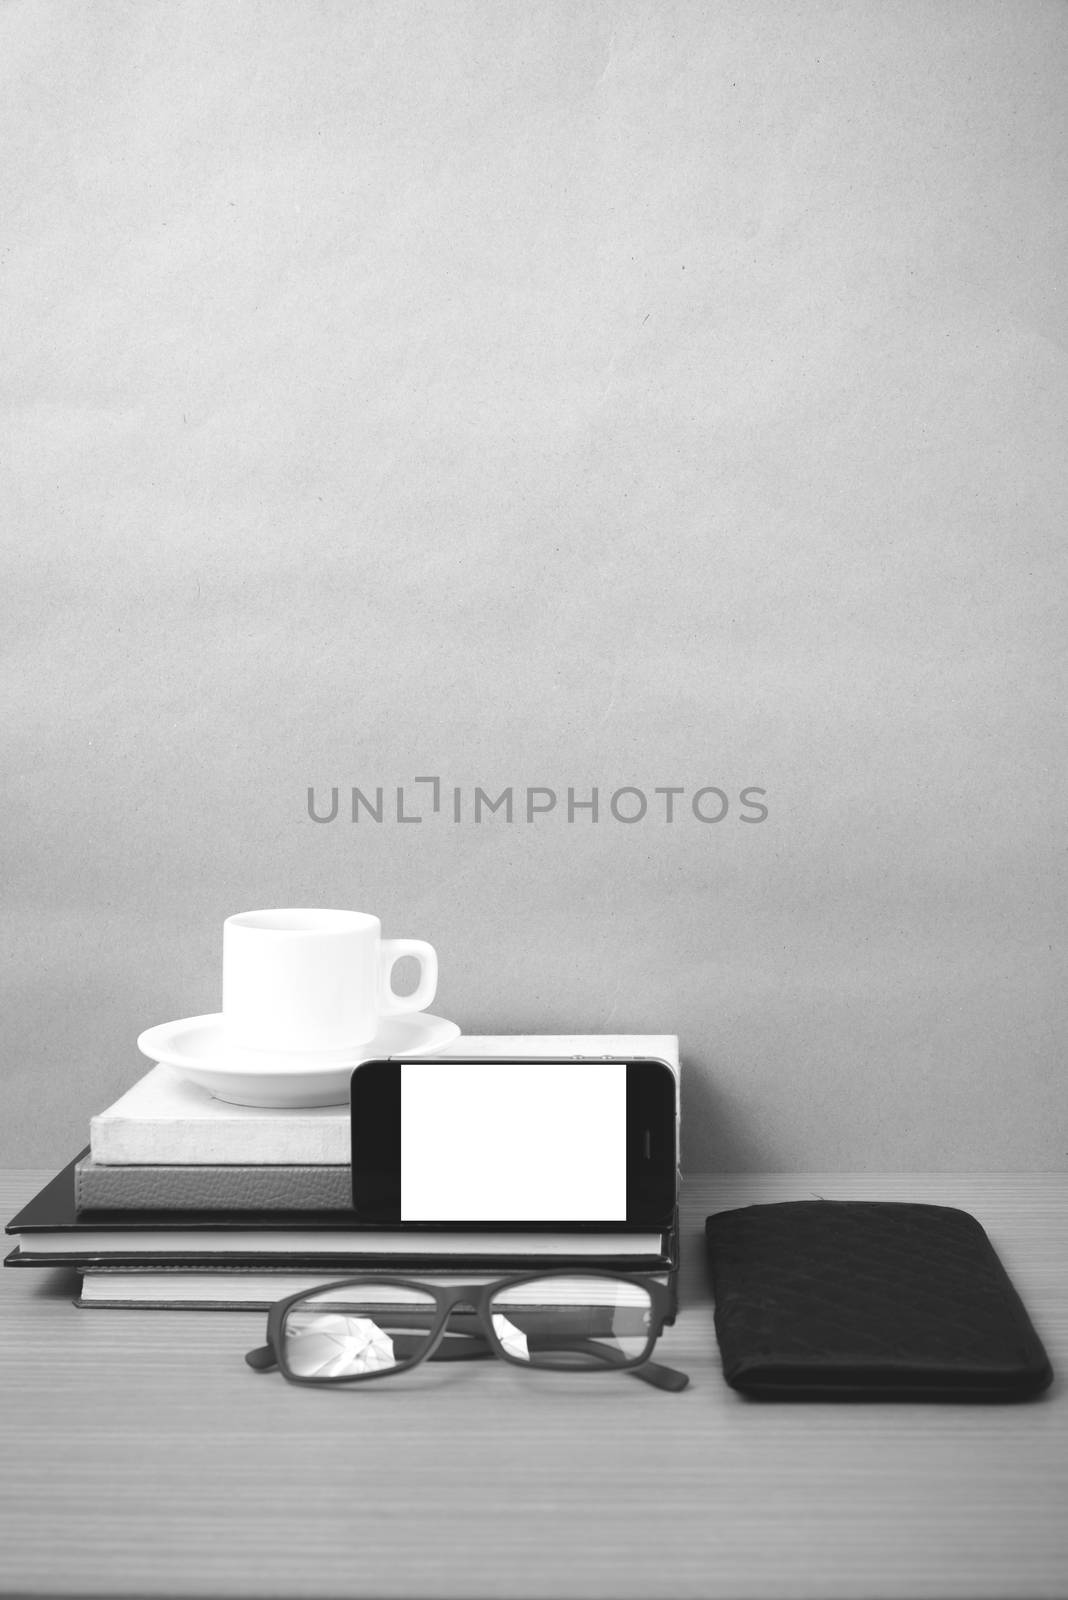 coffee,phone,eyeglasses,stack of book and wallet by ammza12